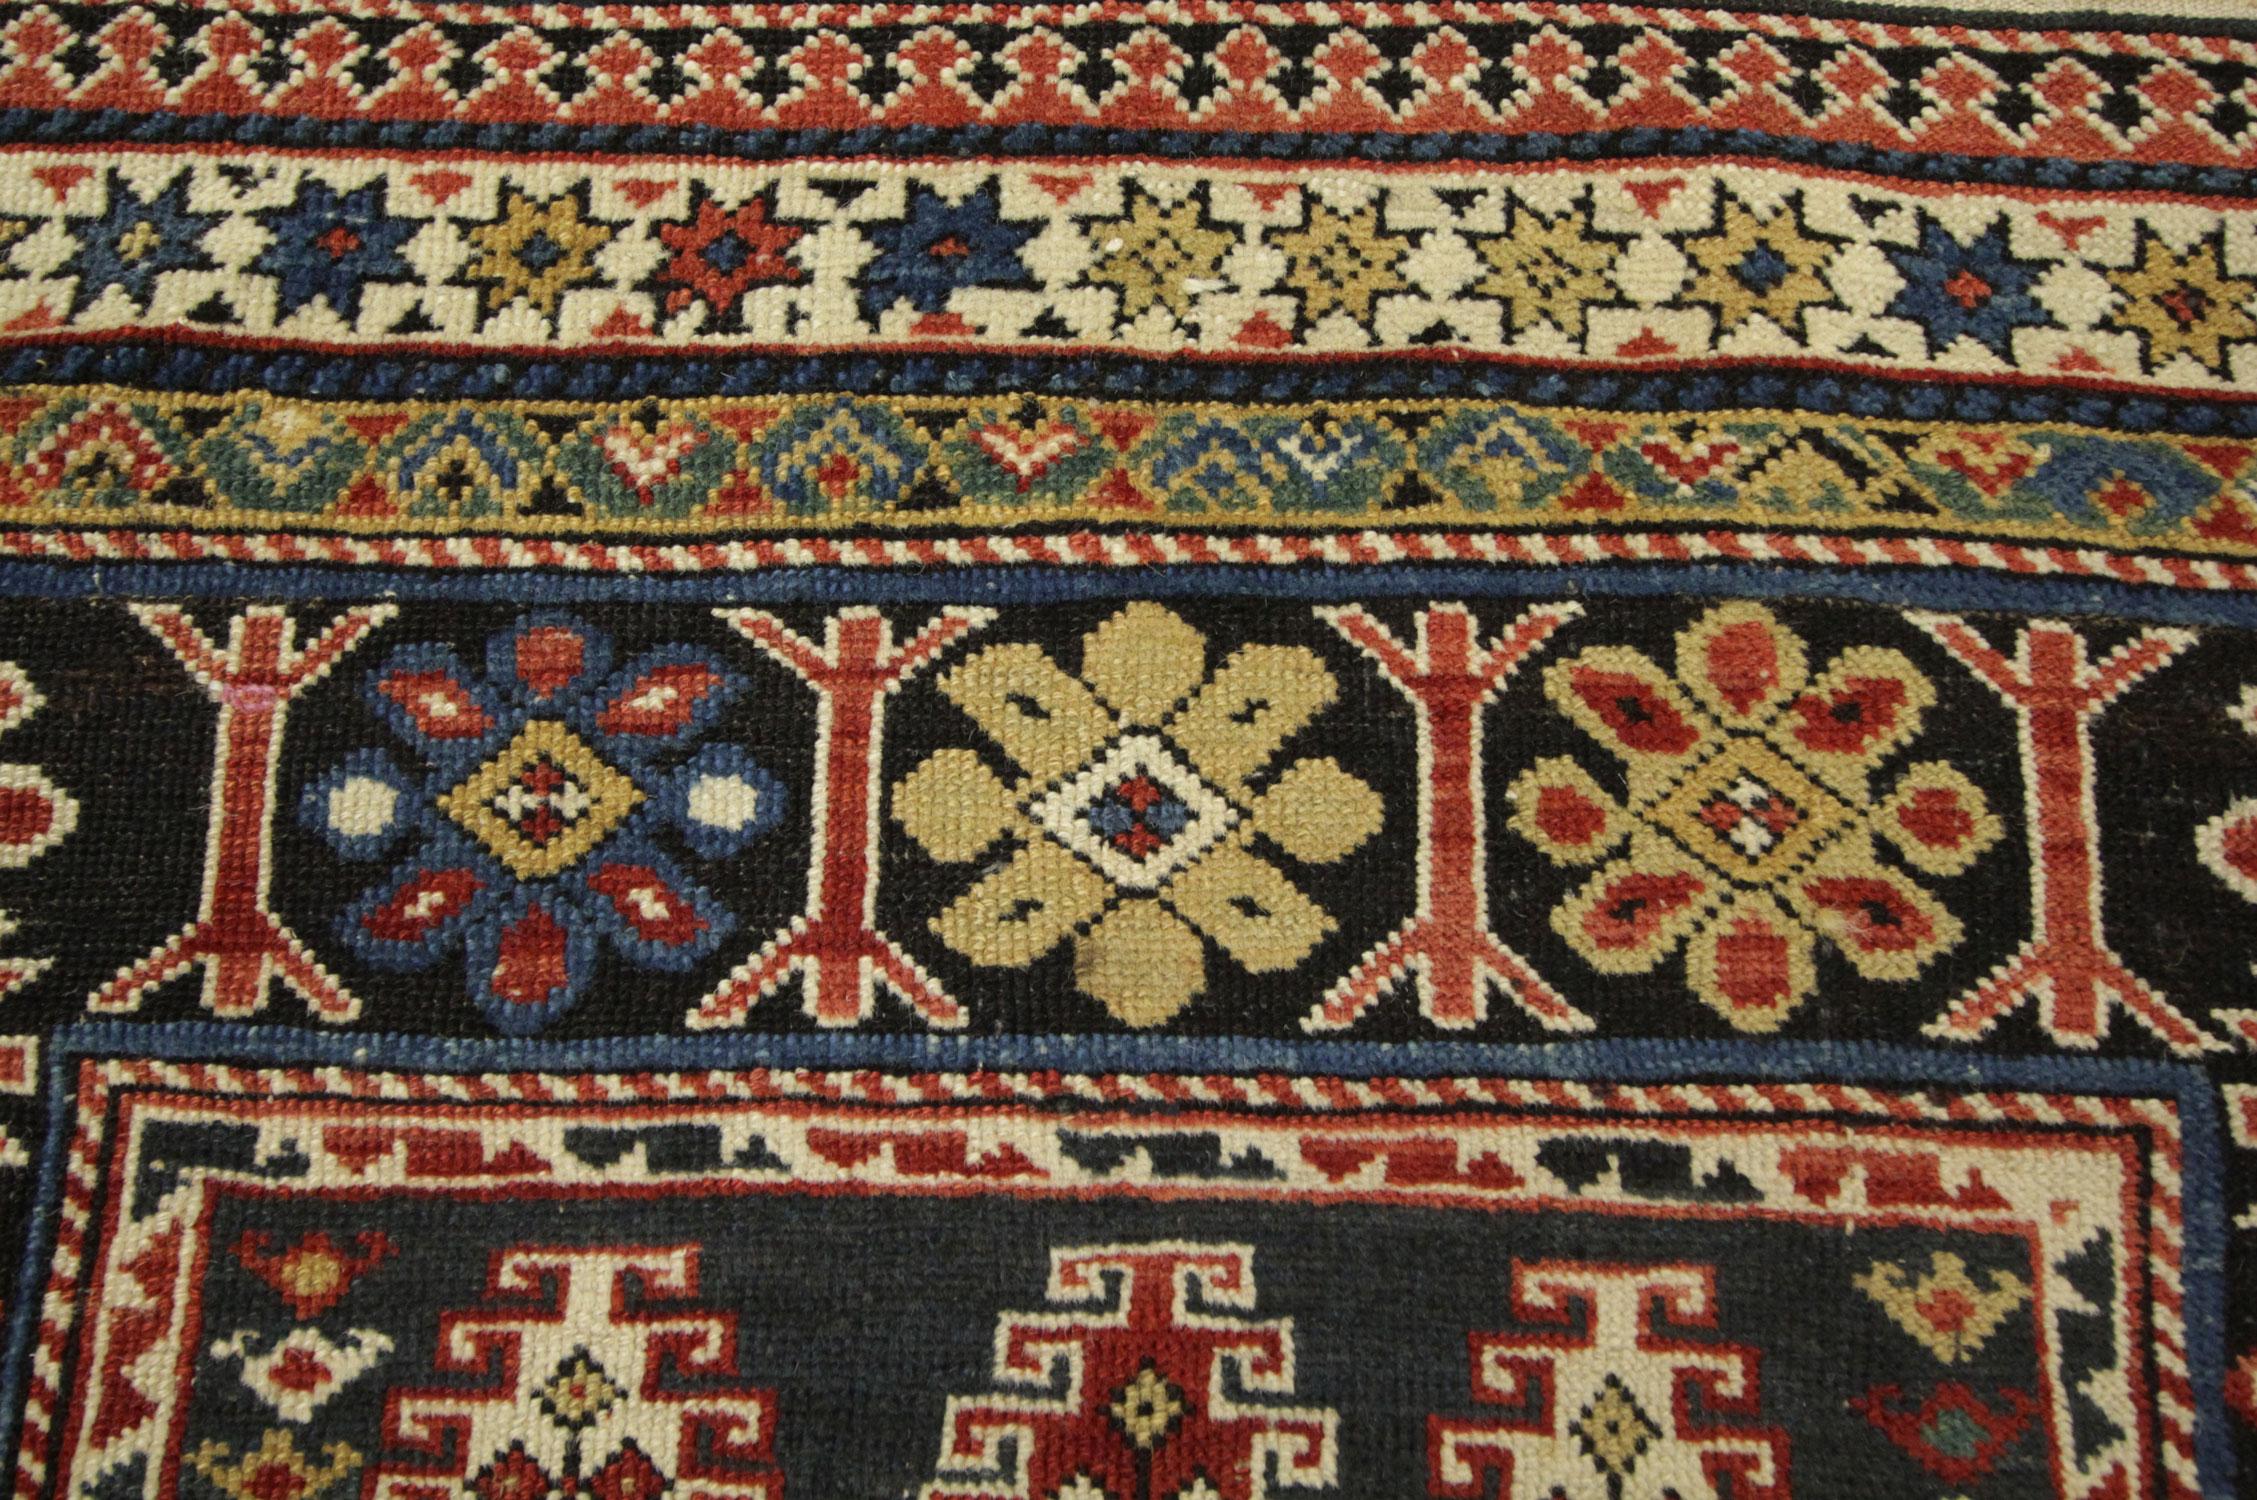 This handmade carpet is an exceptional example of Causation all-over patterned rugs. This geometric oriental rug is in an excellent condition, circa the 1870s. These small rugs are from Chichi, which is a part of the Caucasian area. This floral rug